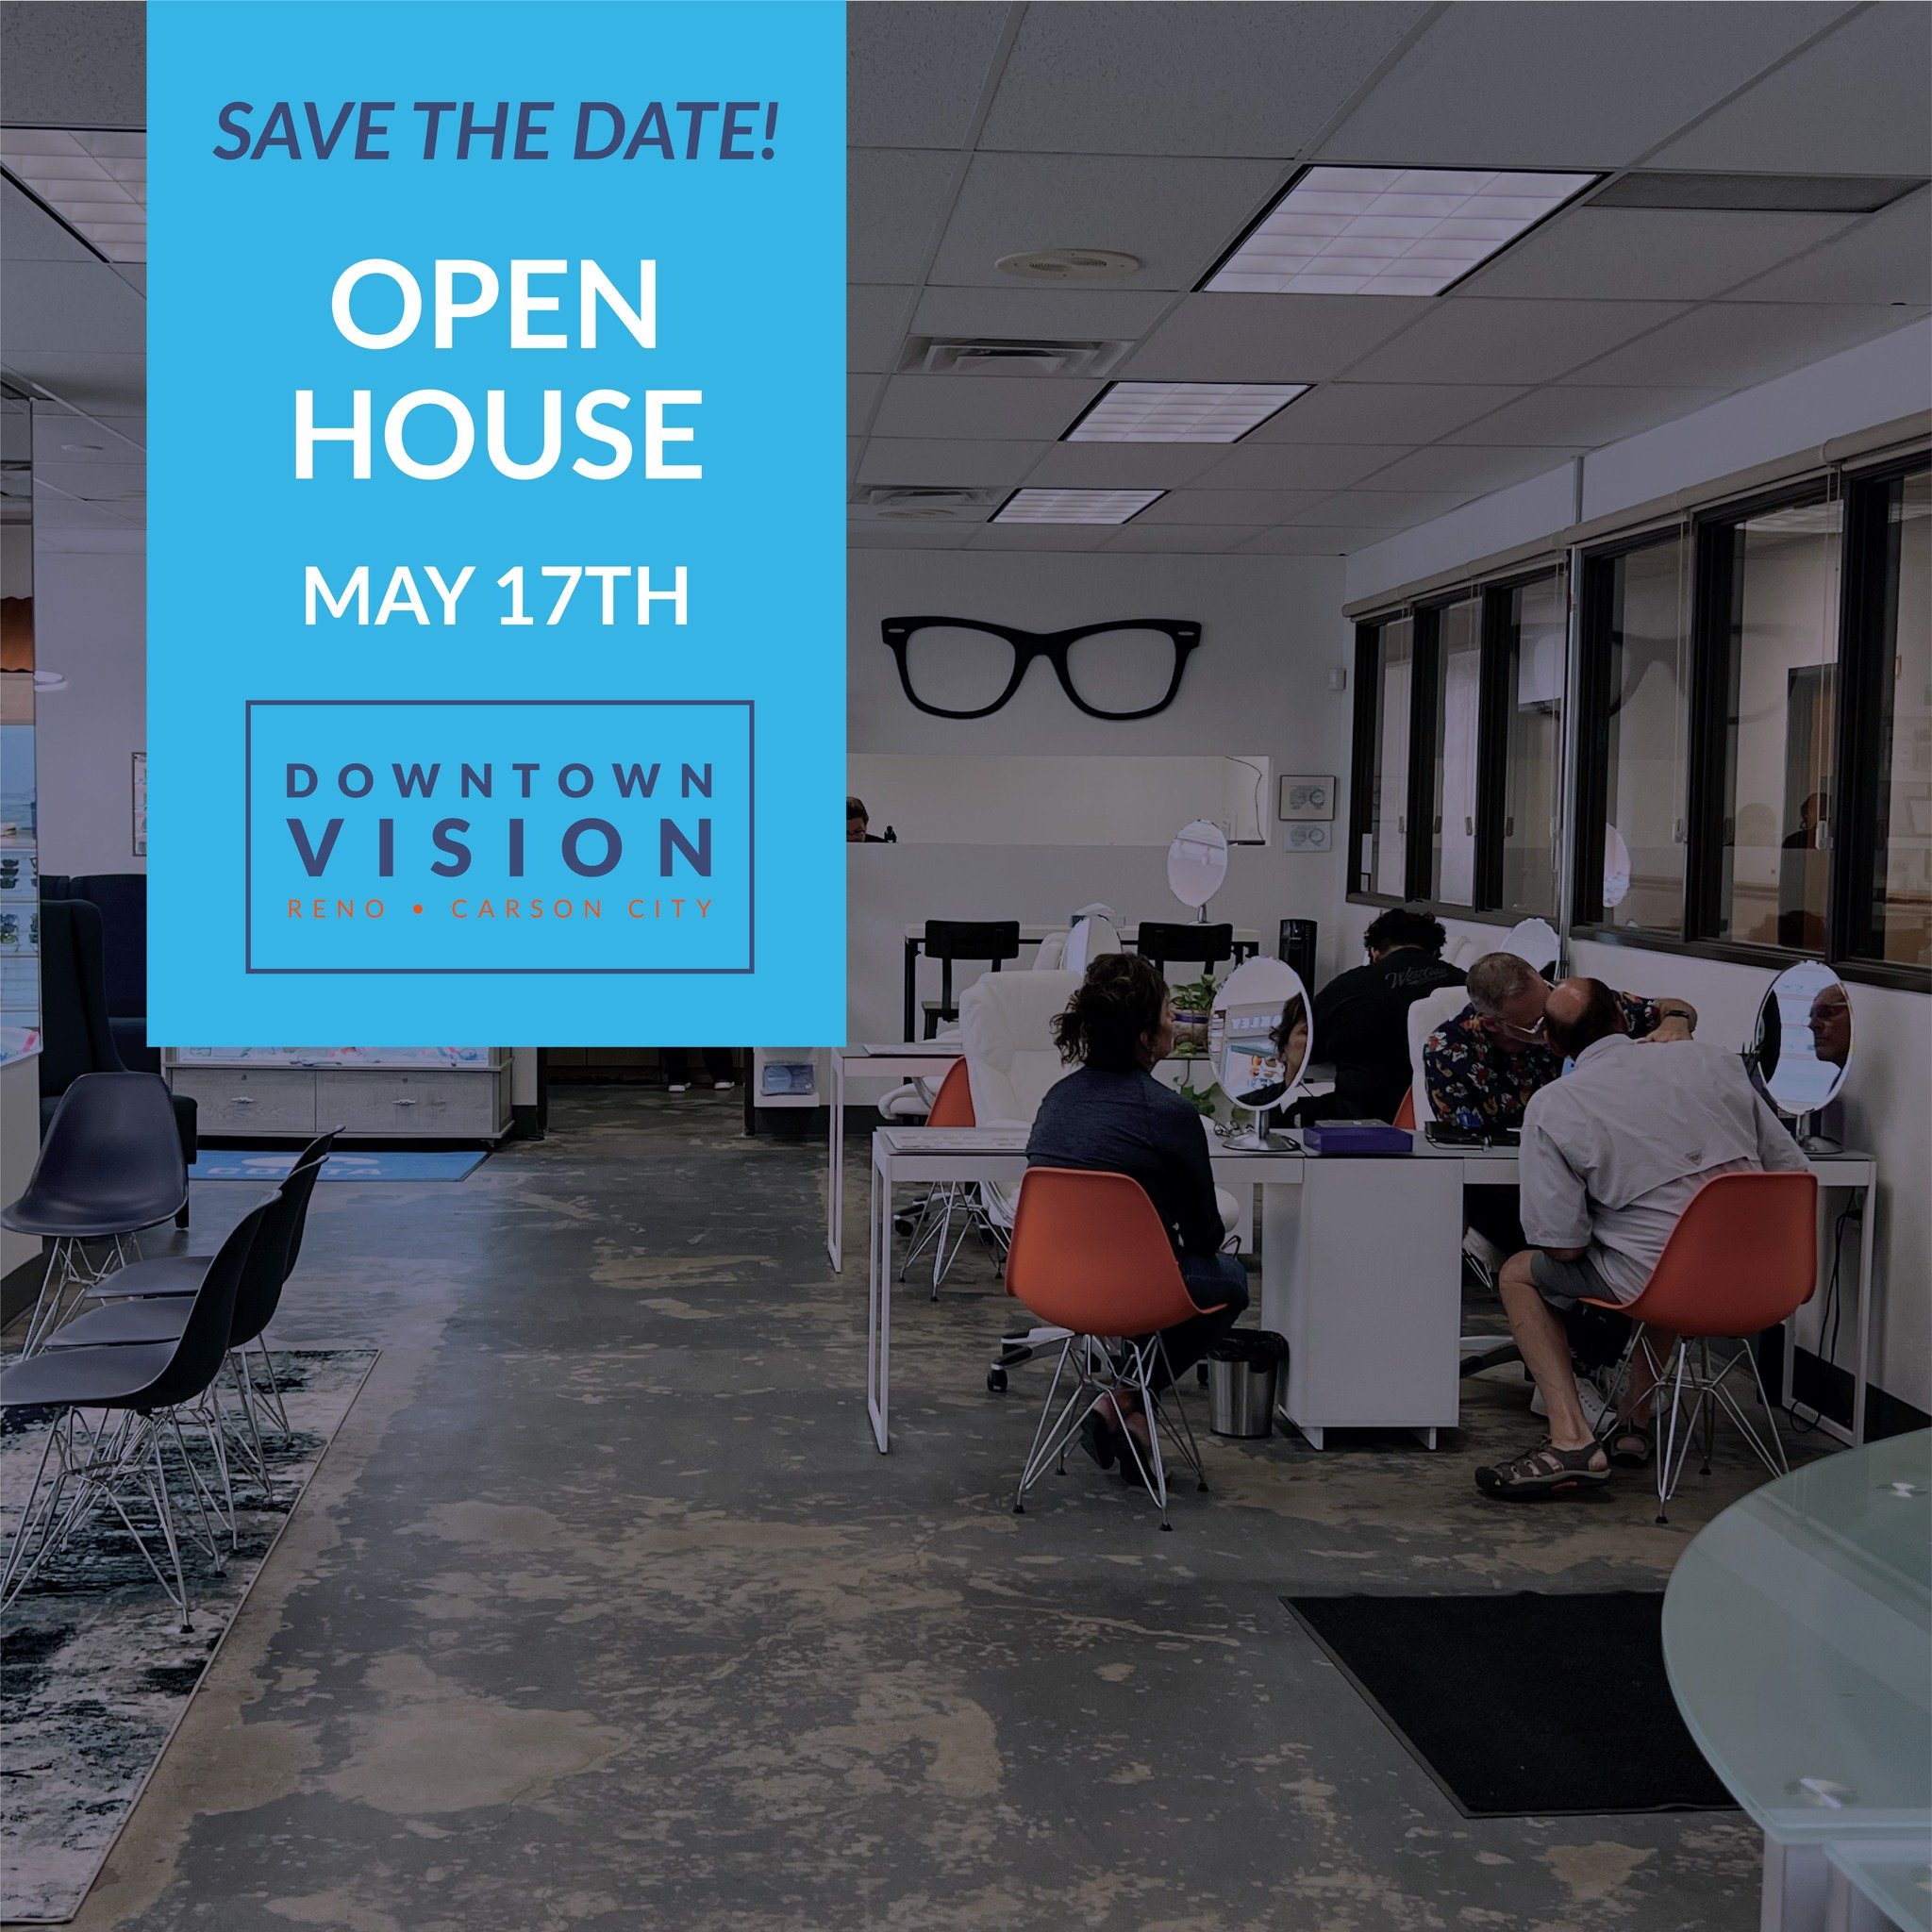 Next month! On May 17th, we&rsquo;re opening our doors and inviting some of your favorite brands to showcase their newest frames and best sellers. You don&rsquo;t want to miss it! Some of these styles you might never see again! 👓

We&rsquo;ll also b